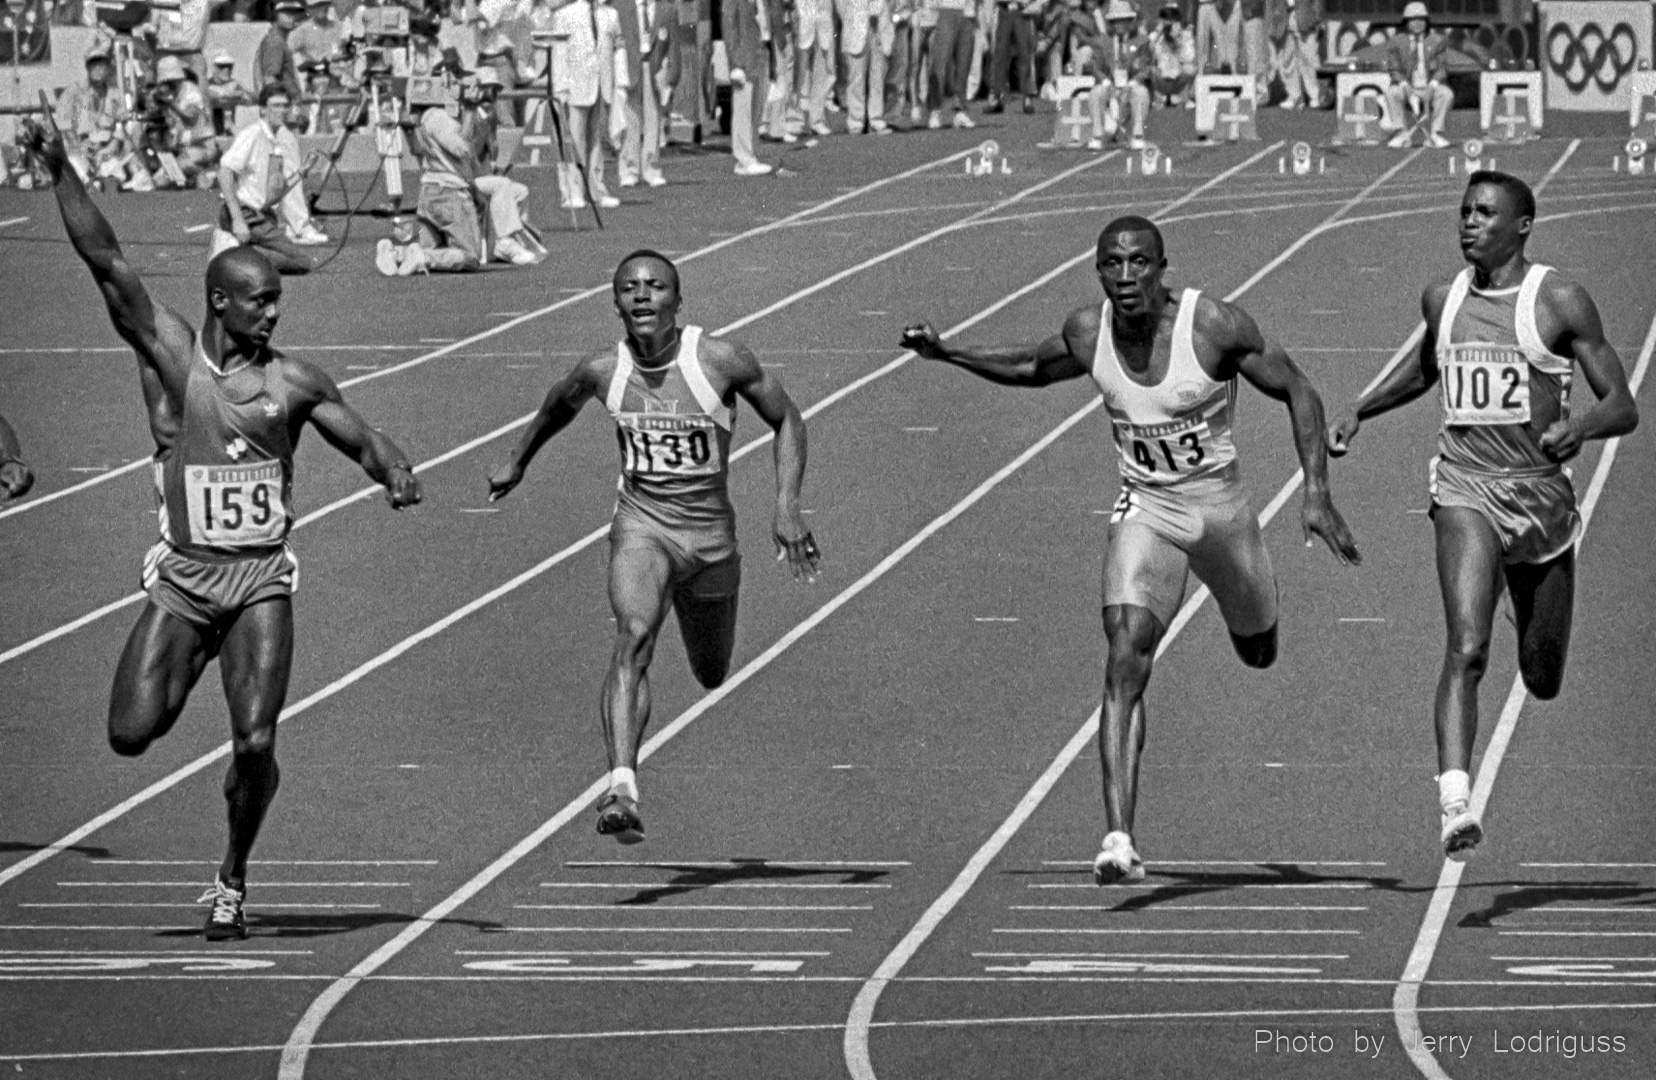 Ben Johnson raises his hand in victory as he looks at rival Carl Lewis in the finals of the men's 100 meter dash at the 1988 Seoul Olympic Games. Johnson was later disqualified for drug use, giving the gold medal to Lewis.